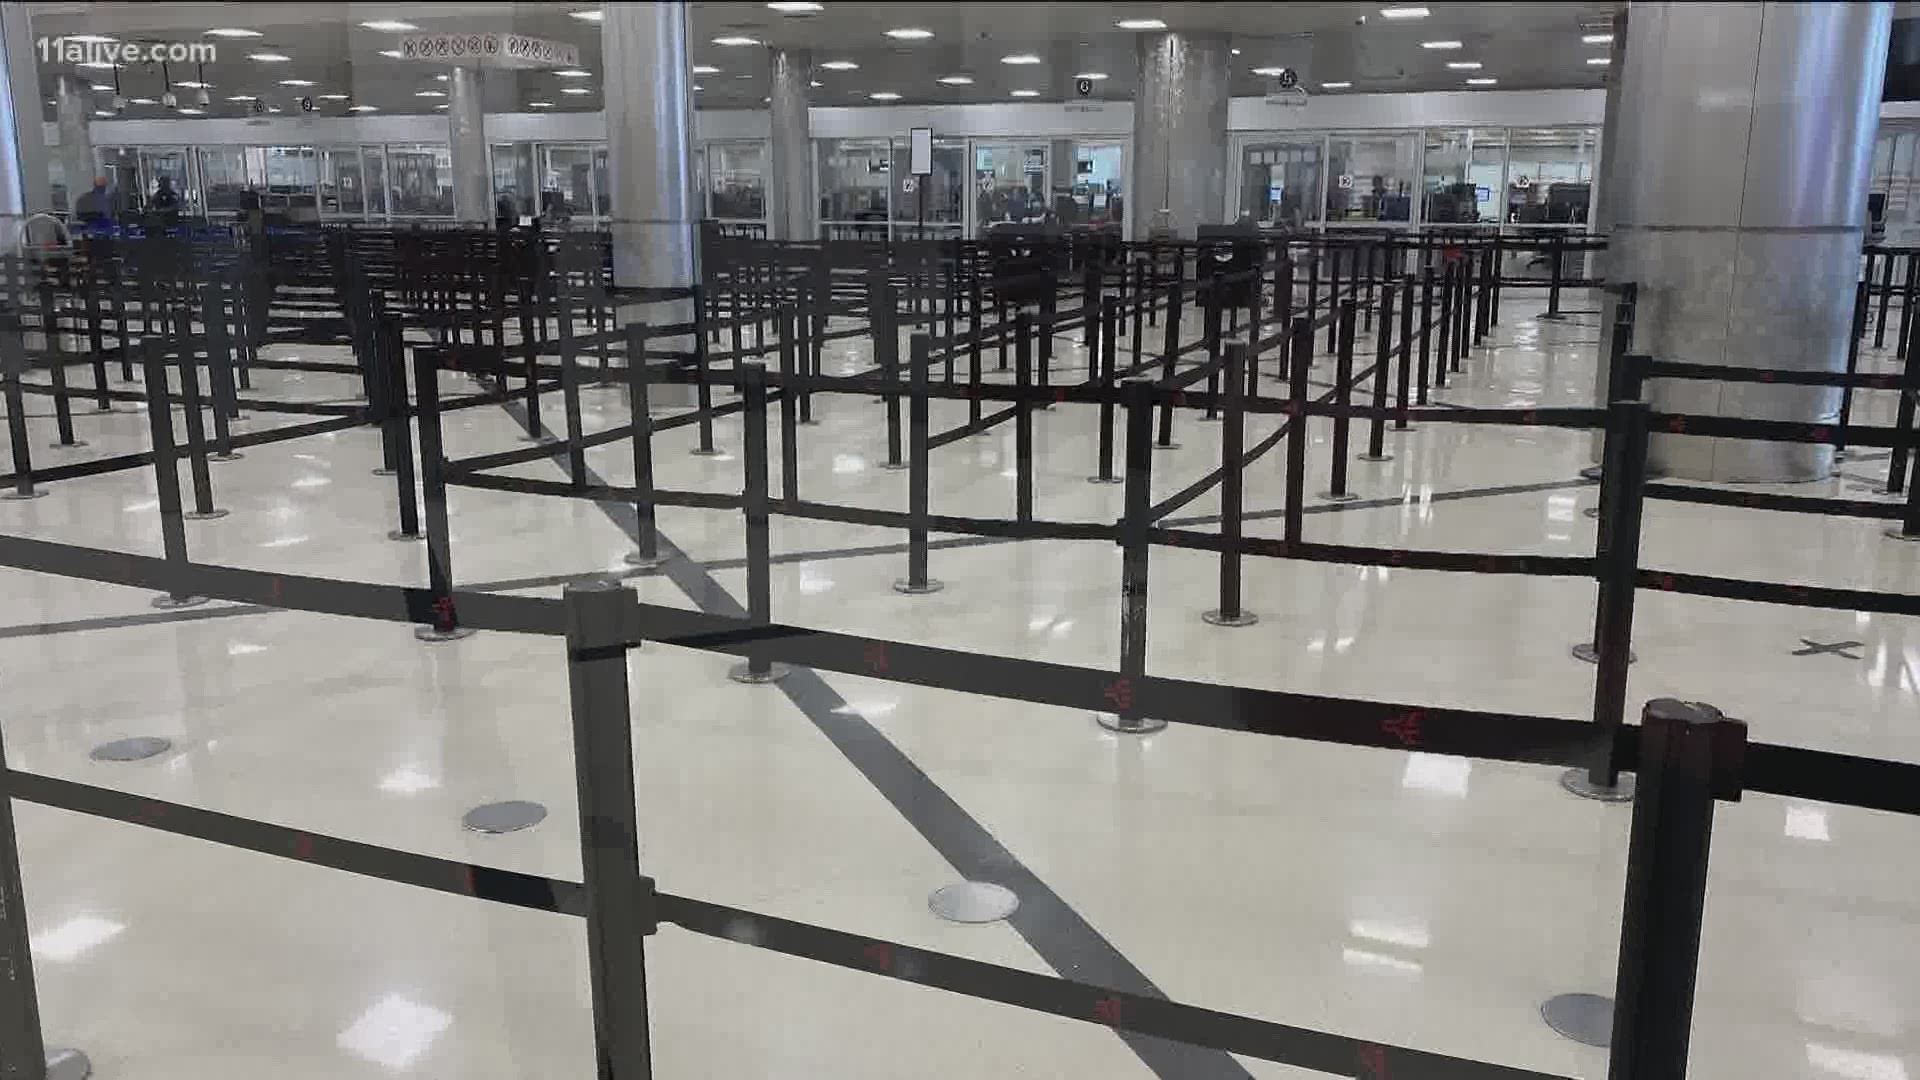 Airport officials warned passengers to arrive at the airport in enough time because the lines to get through security were getting backed up.